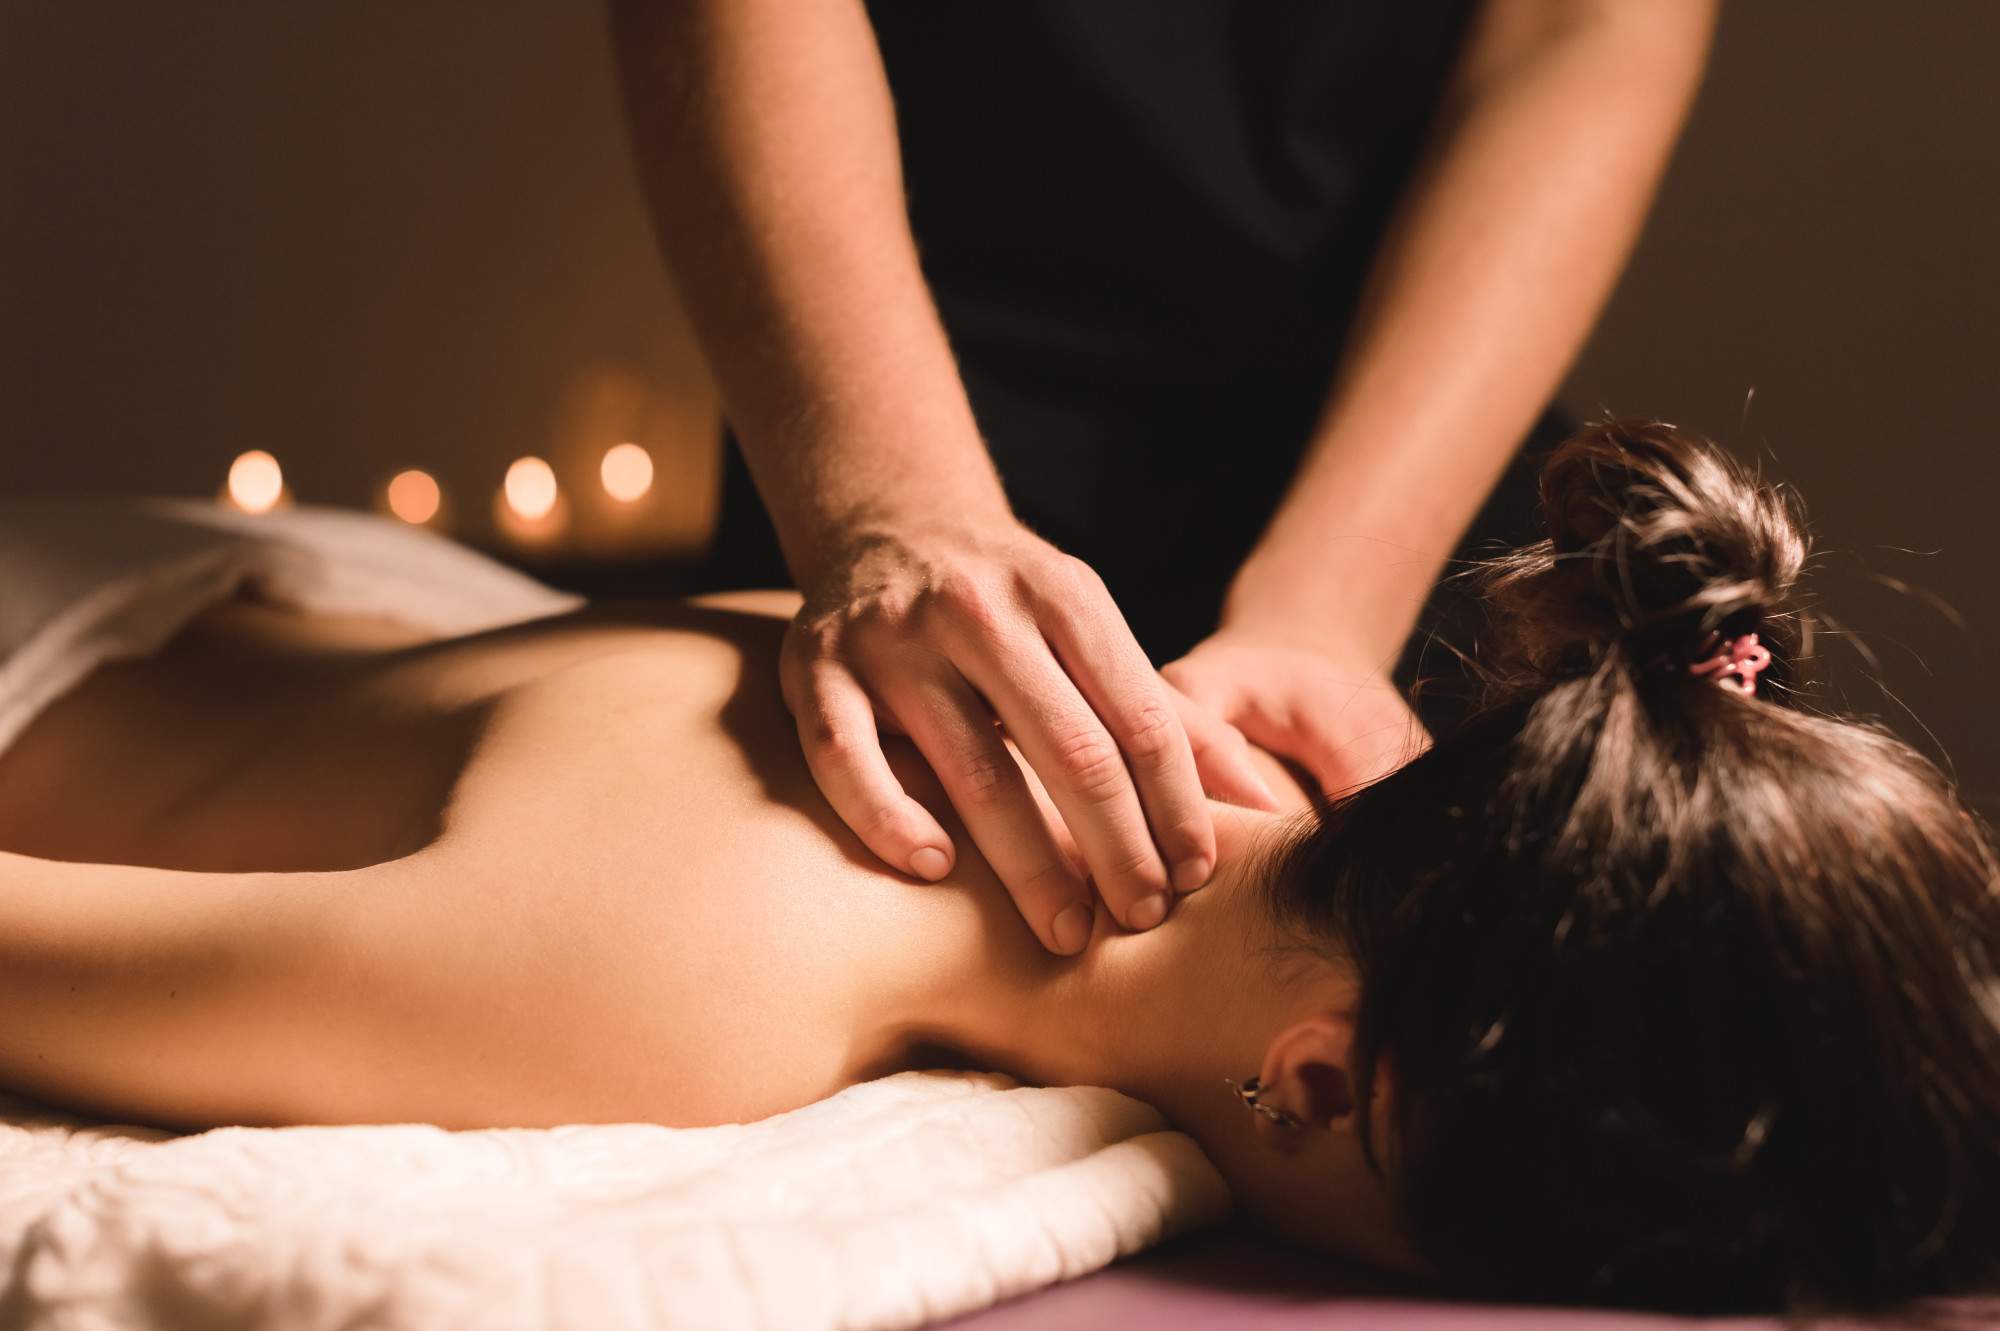 Massage Therapist vs Masseur: What Are the Differences?